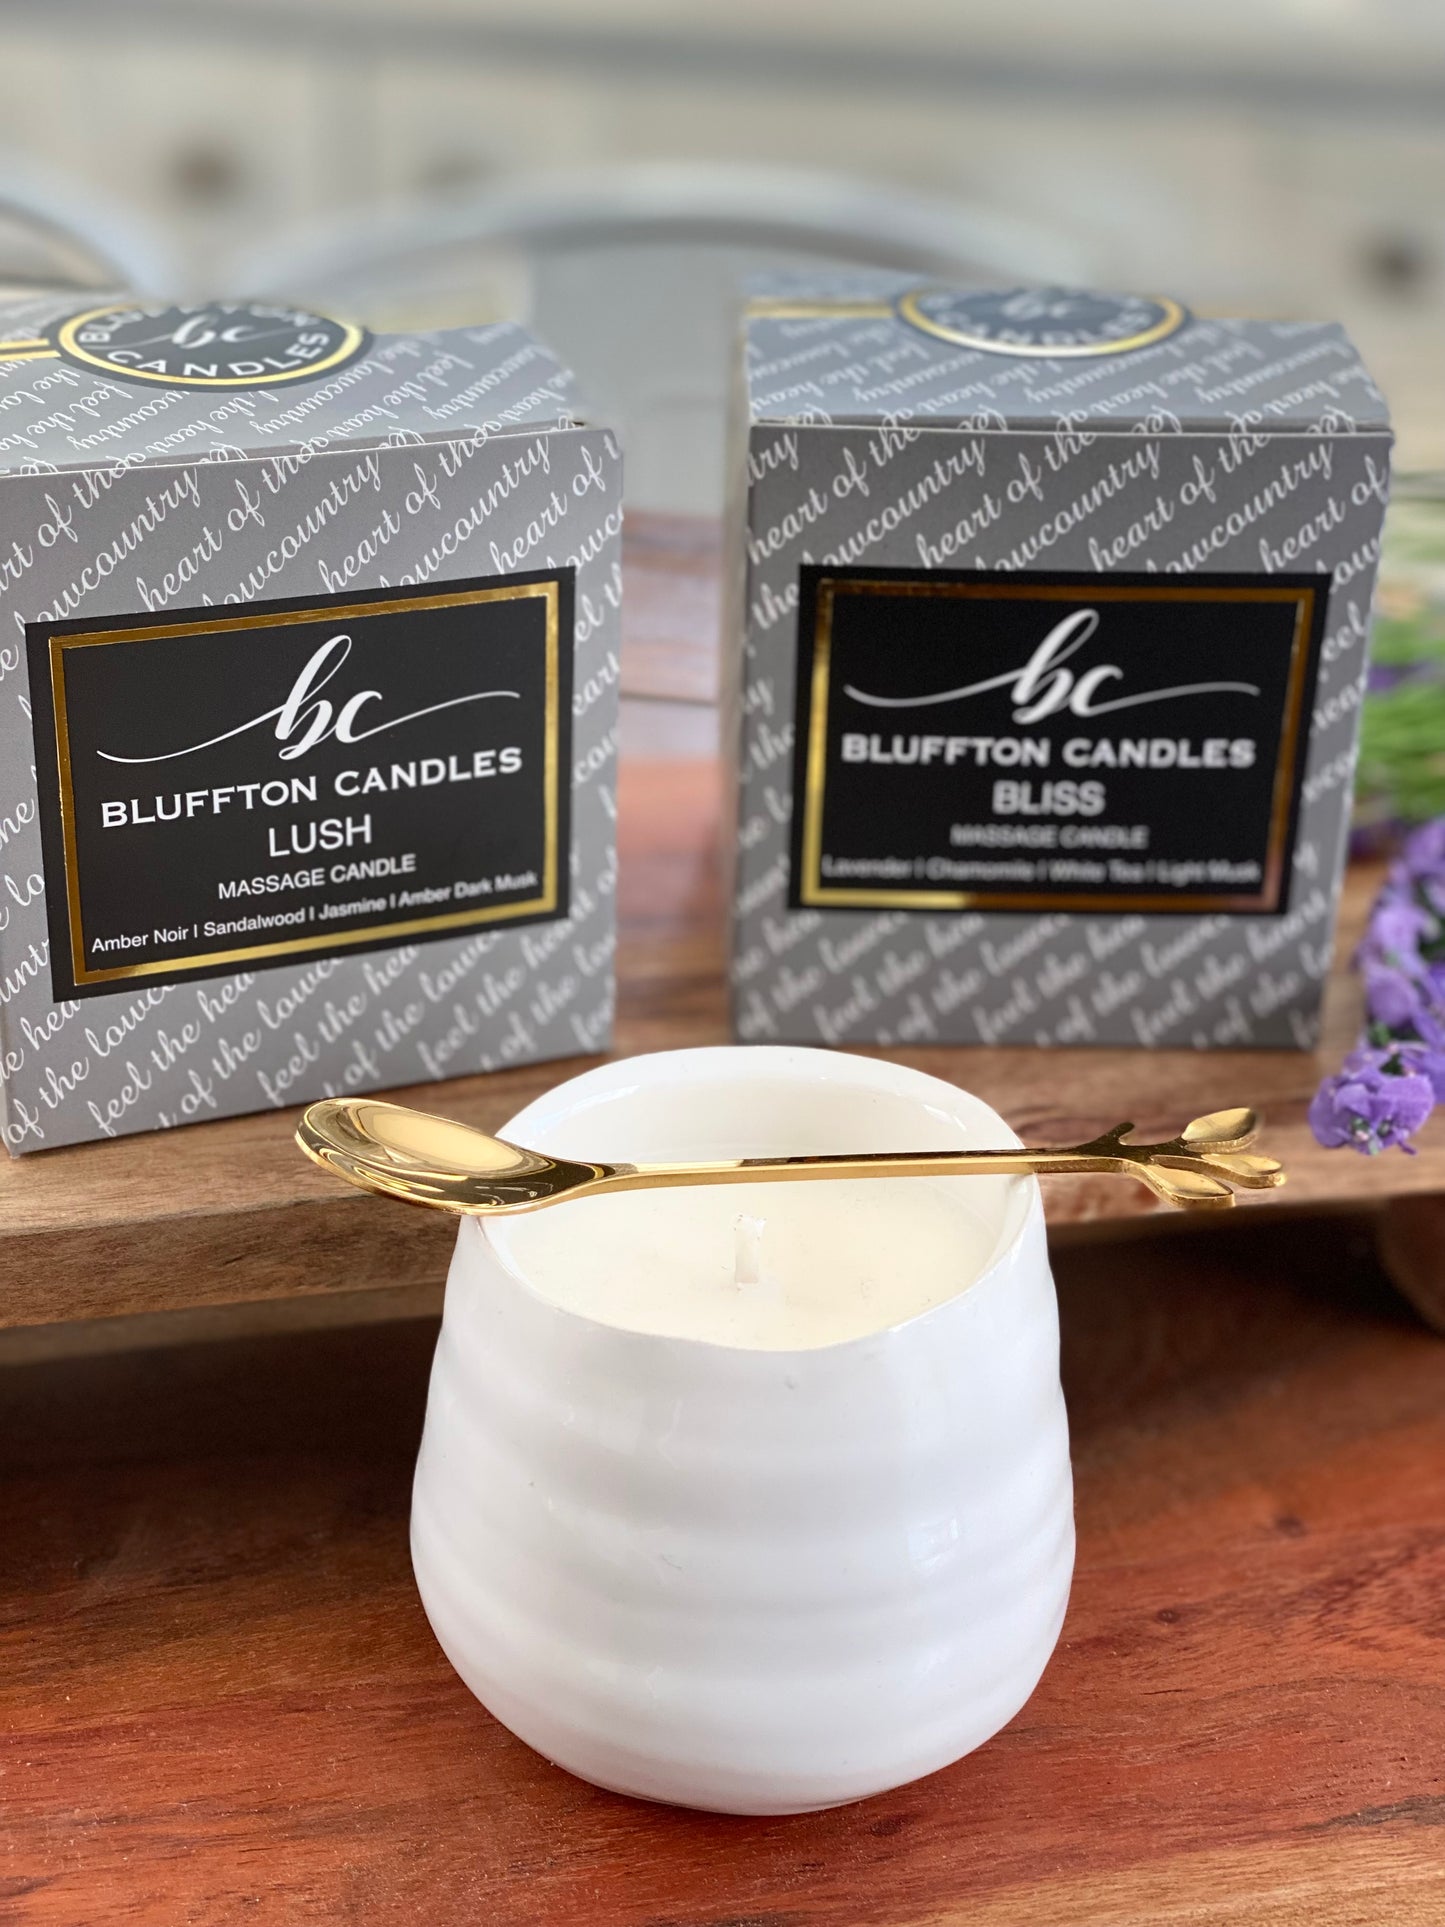 Massage Candle | BLISS | 5 oz. Lavender Tea & Tonic | Cucumber | Honeydew | Chamomile | White Tea | Light Musk. Bluffton Candles - The Bluffton Shop - Gift Shops